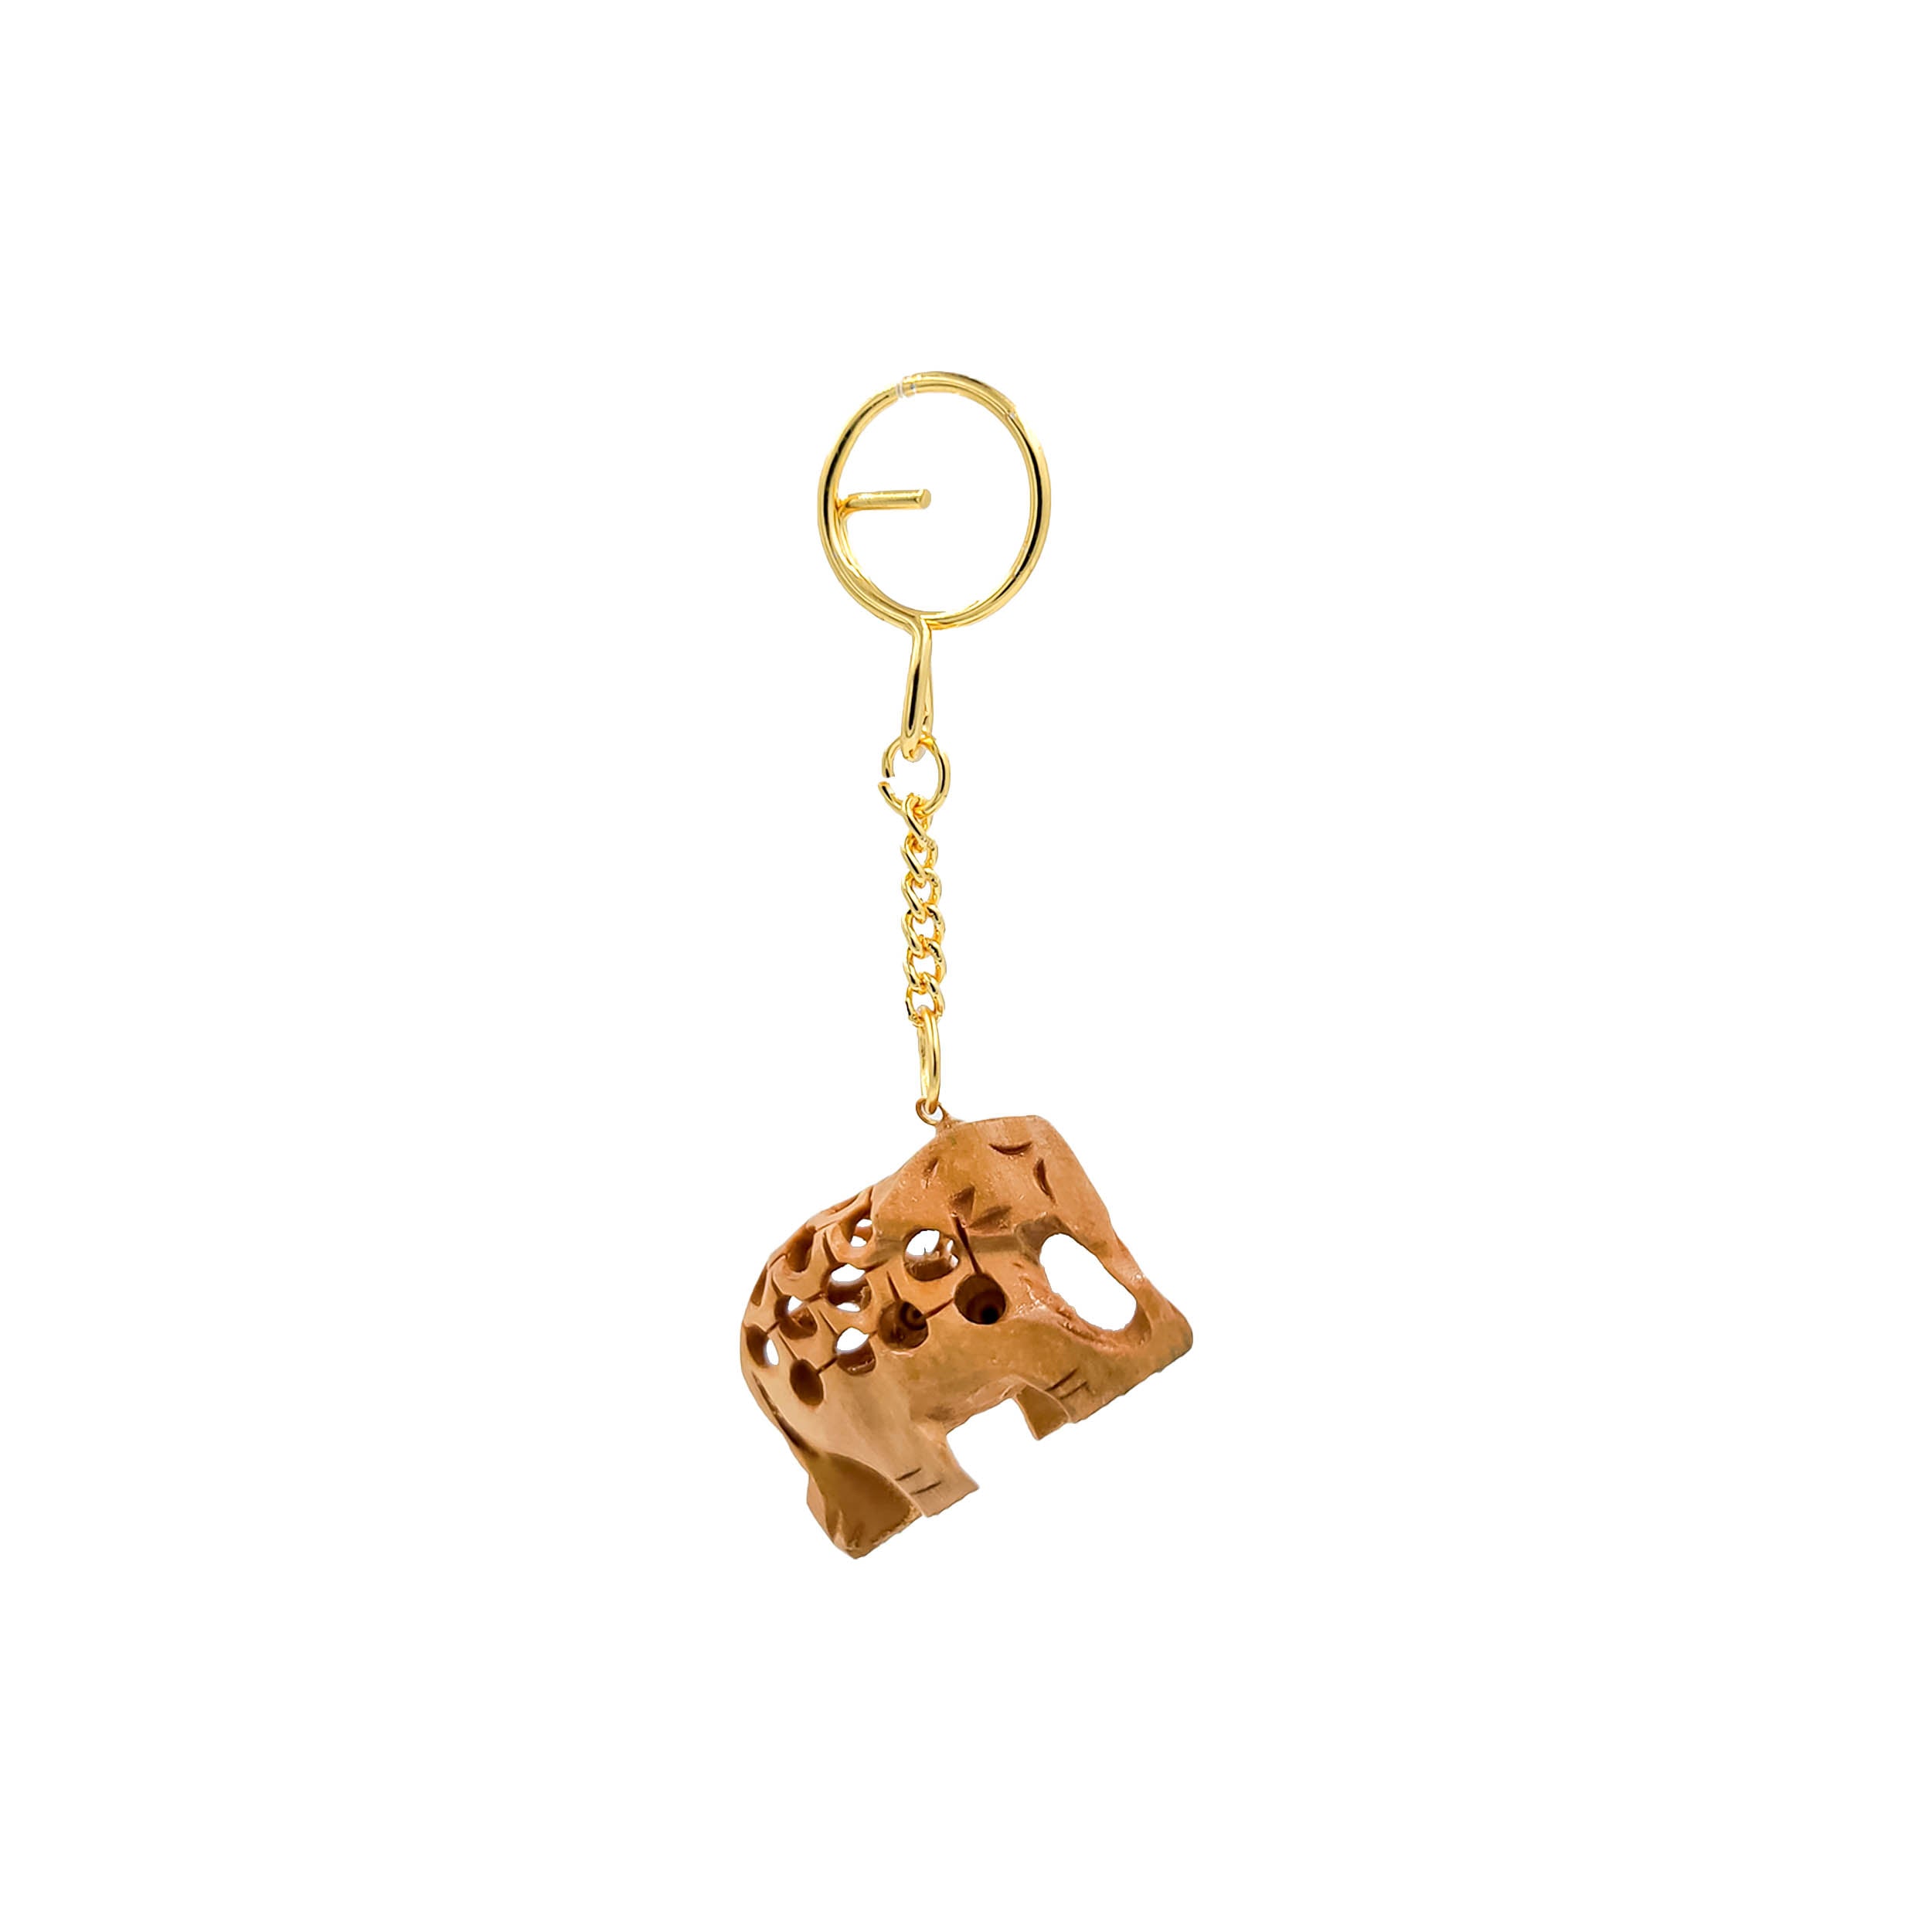 Carry a piece of art in your pocket with 3D Elephant Handmade Wooden Keychain